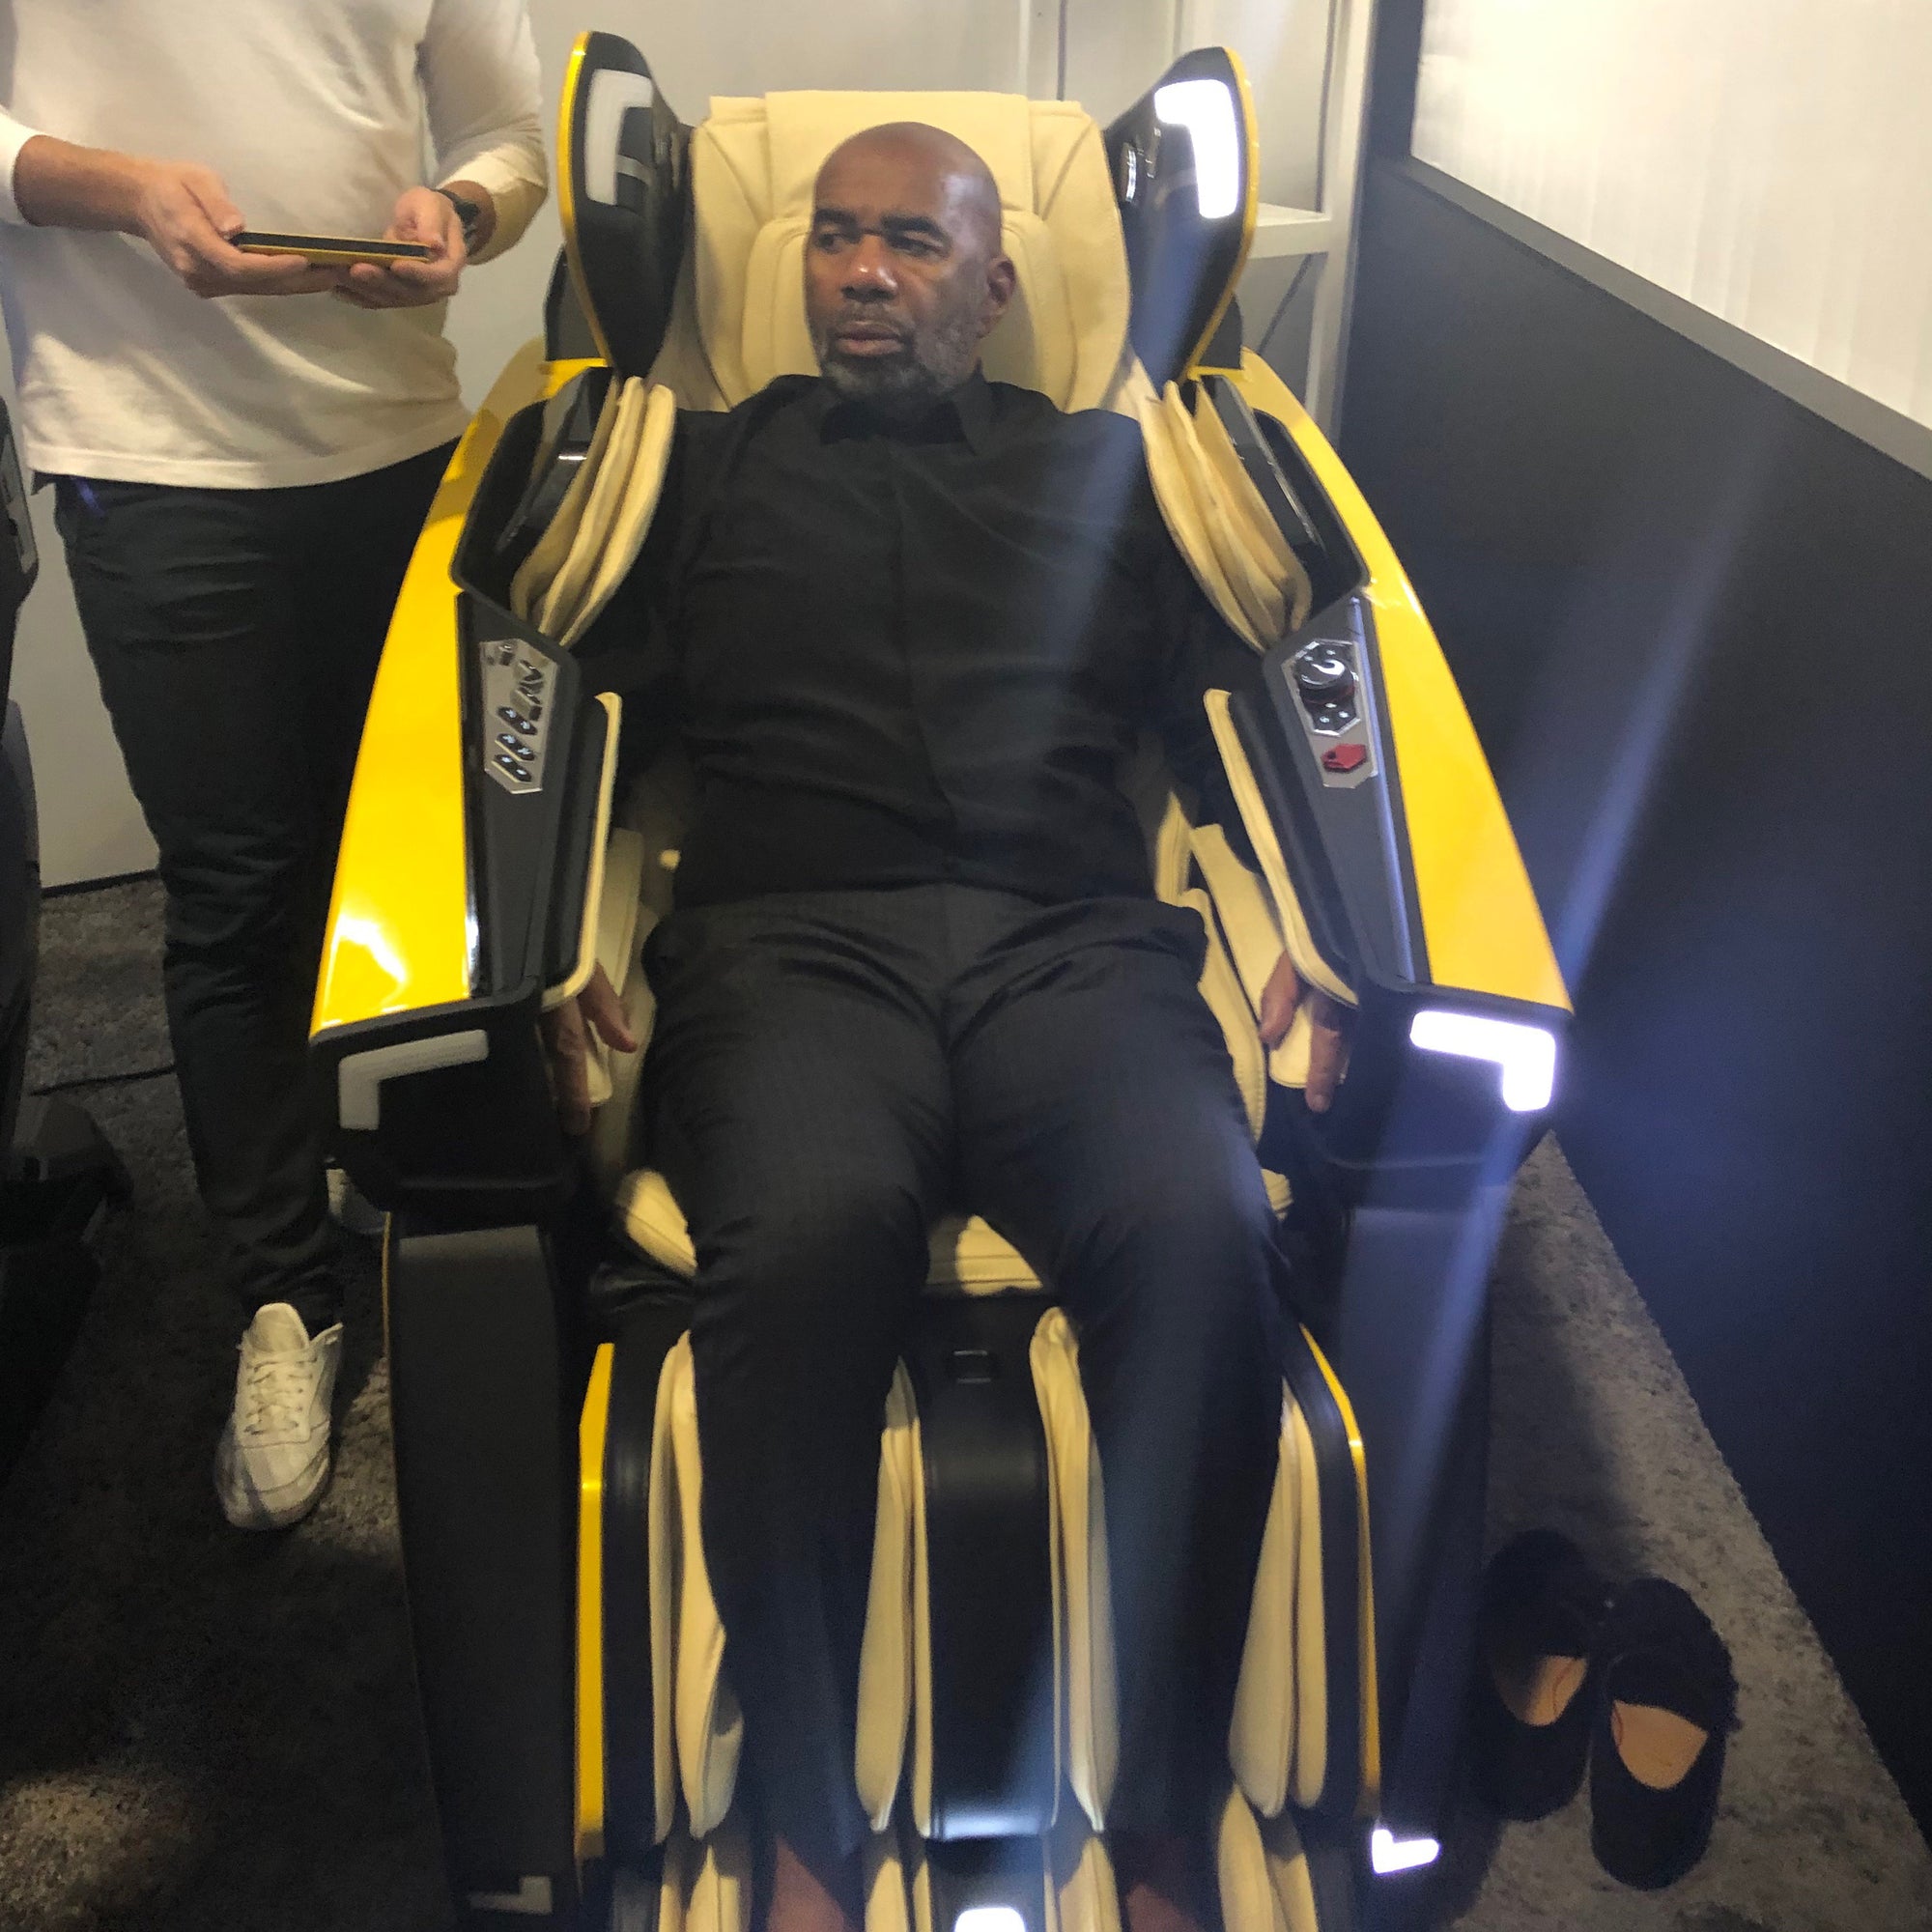 A gentleman is trying the Lamborghini massage chair.